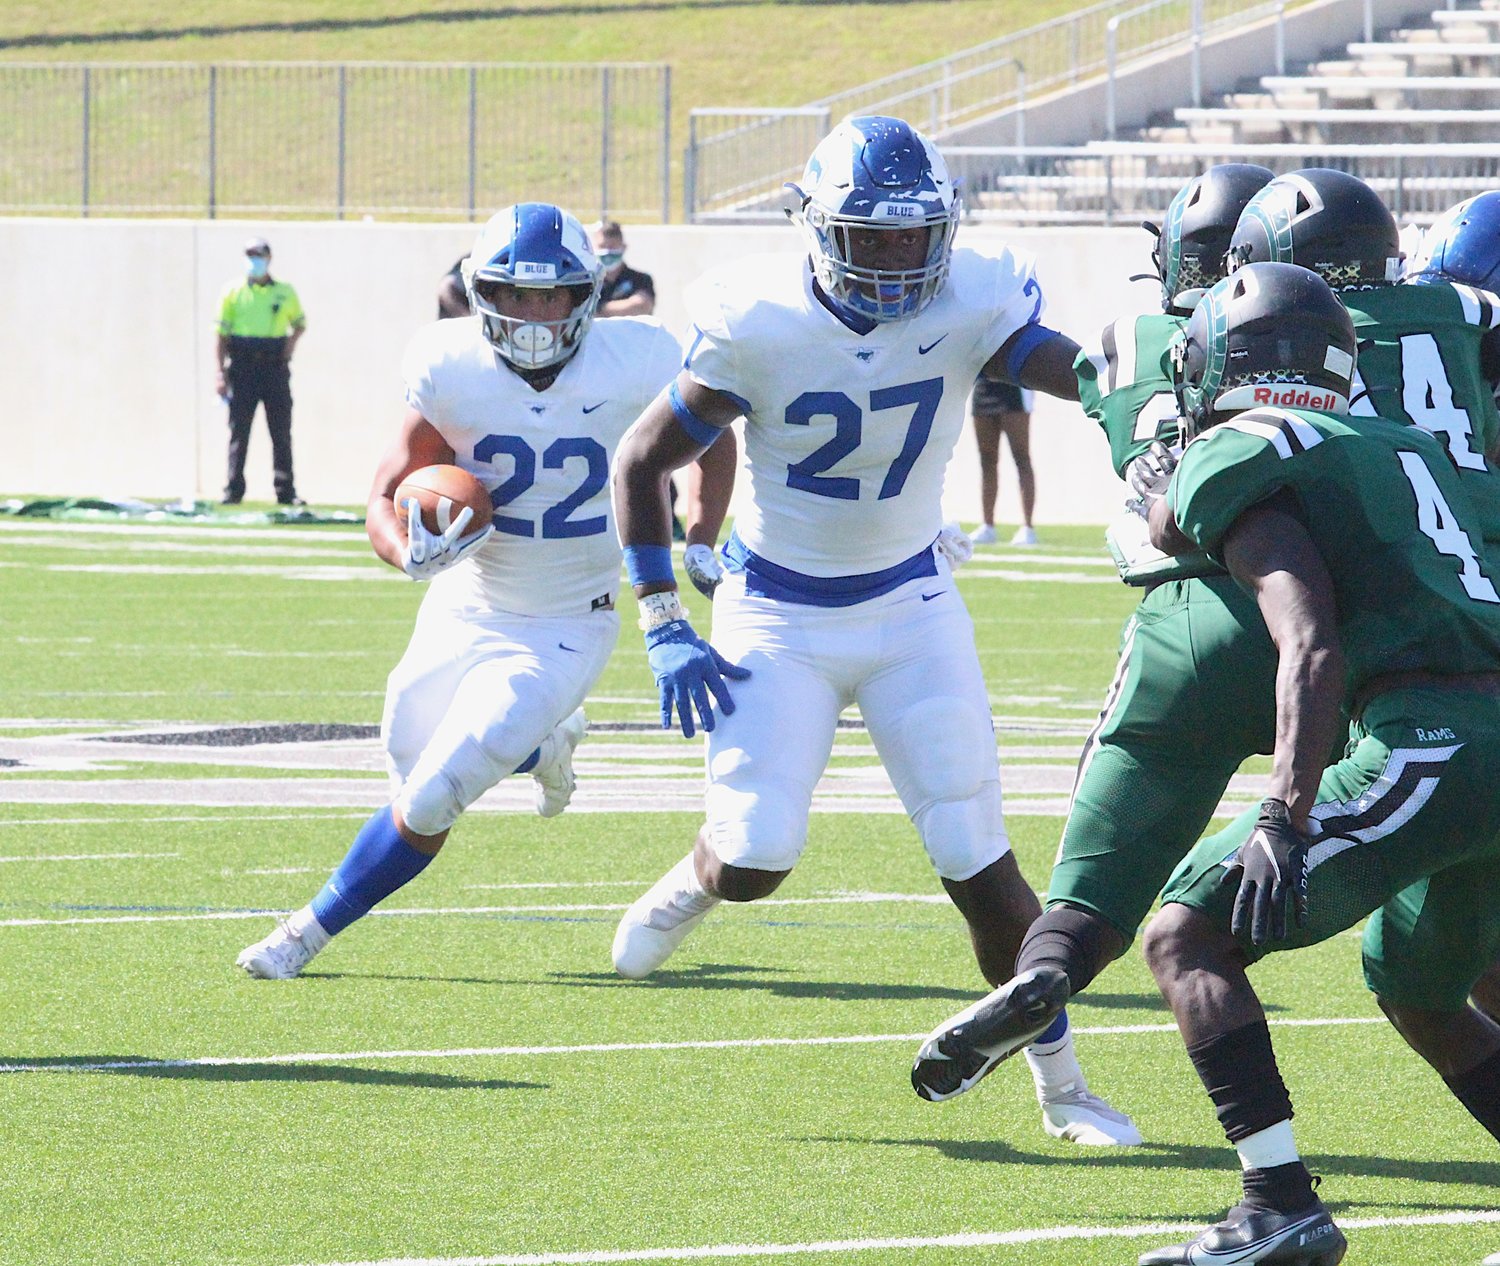 Taylor senior running back Casey Shorter eyes a path behind the blocking of Dylan Spencer during Saturday's game against Mayde Creek at Legacy Stadium.